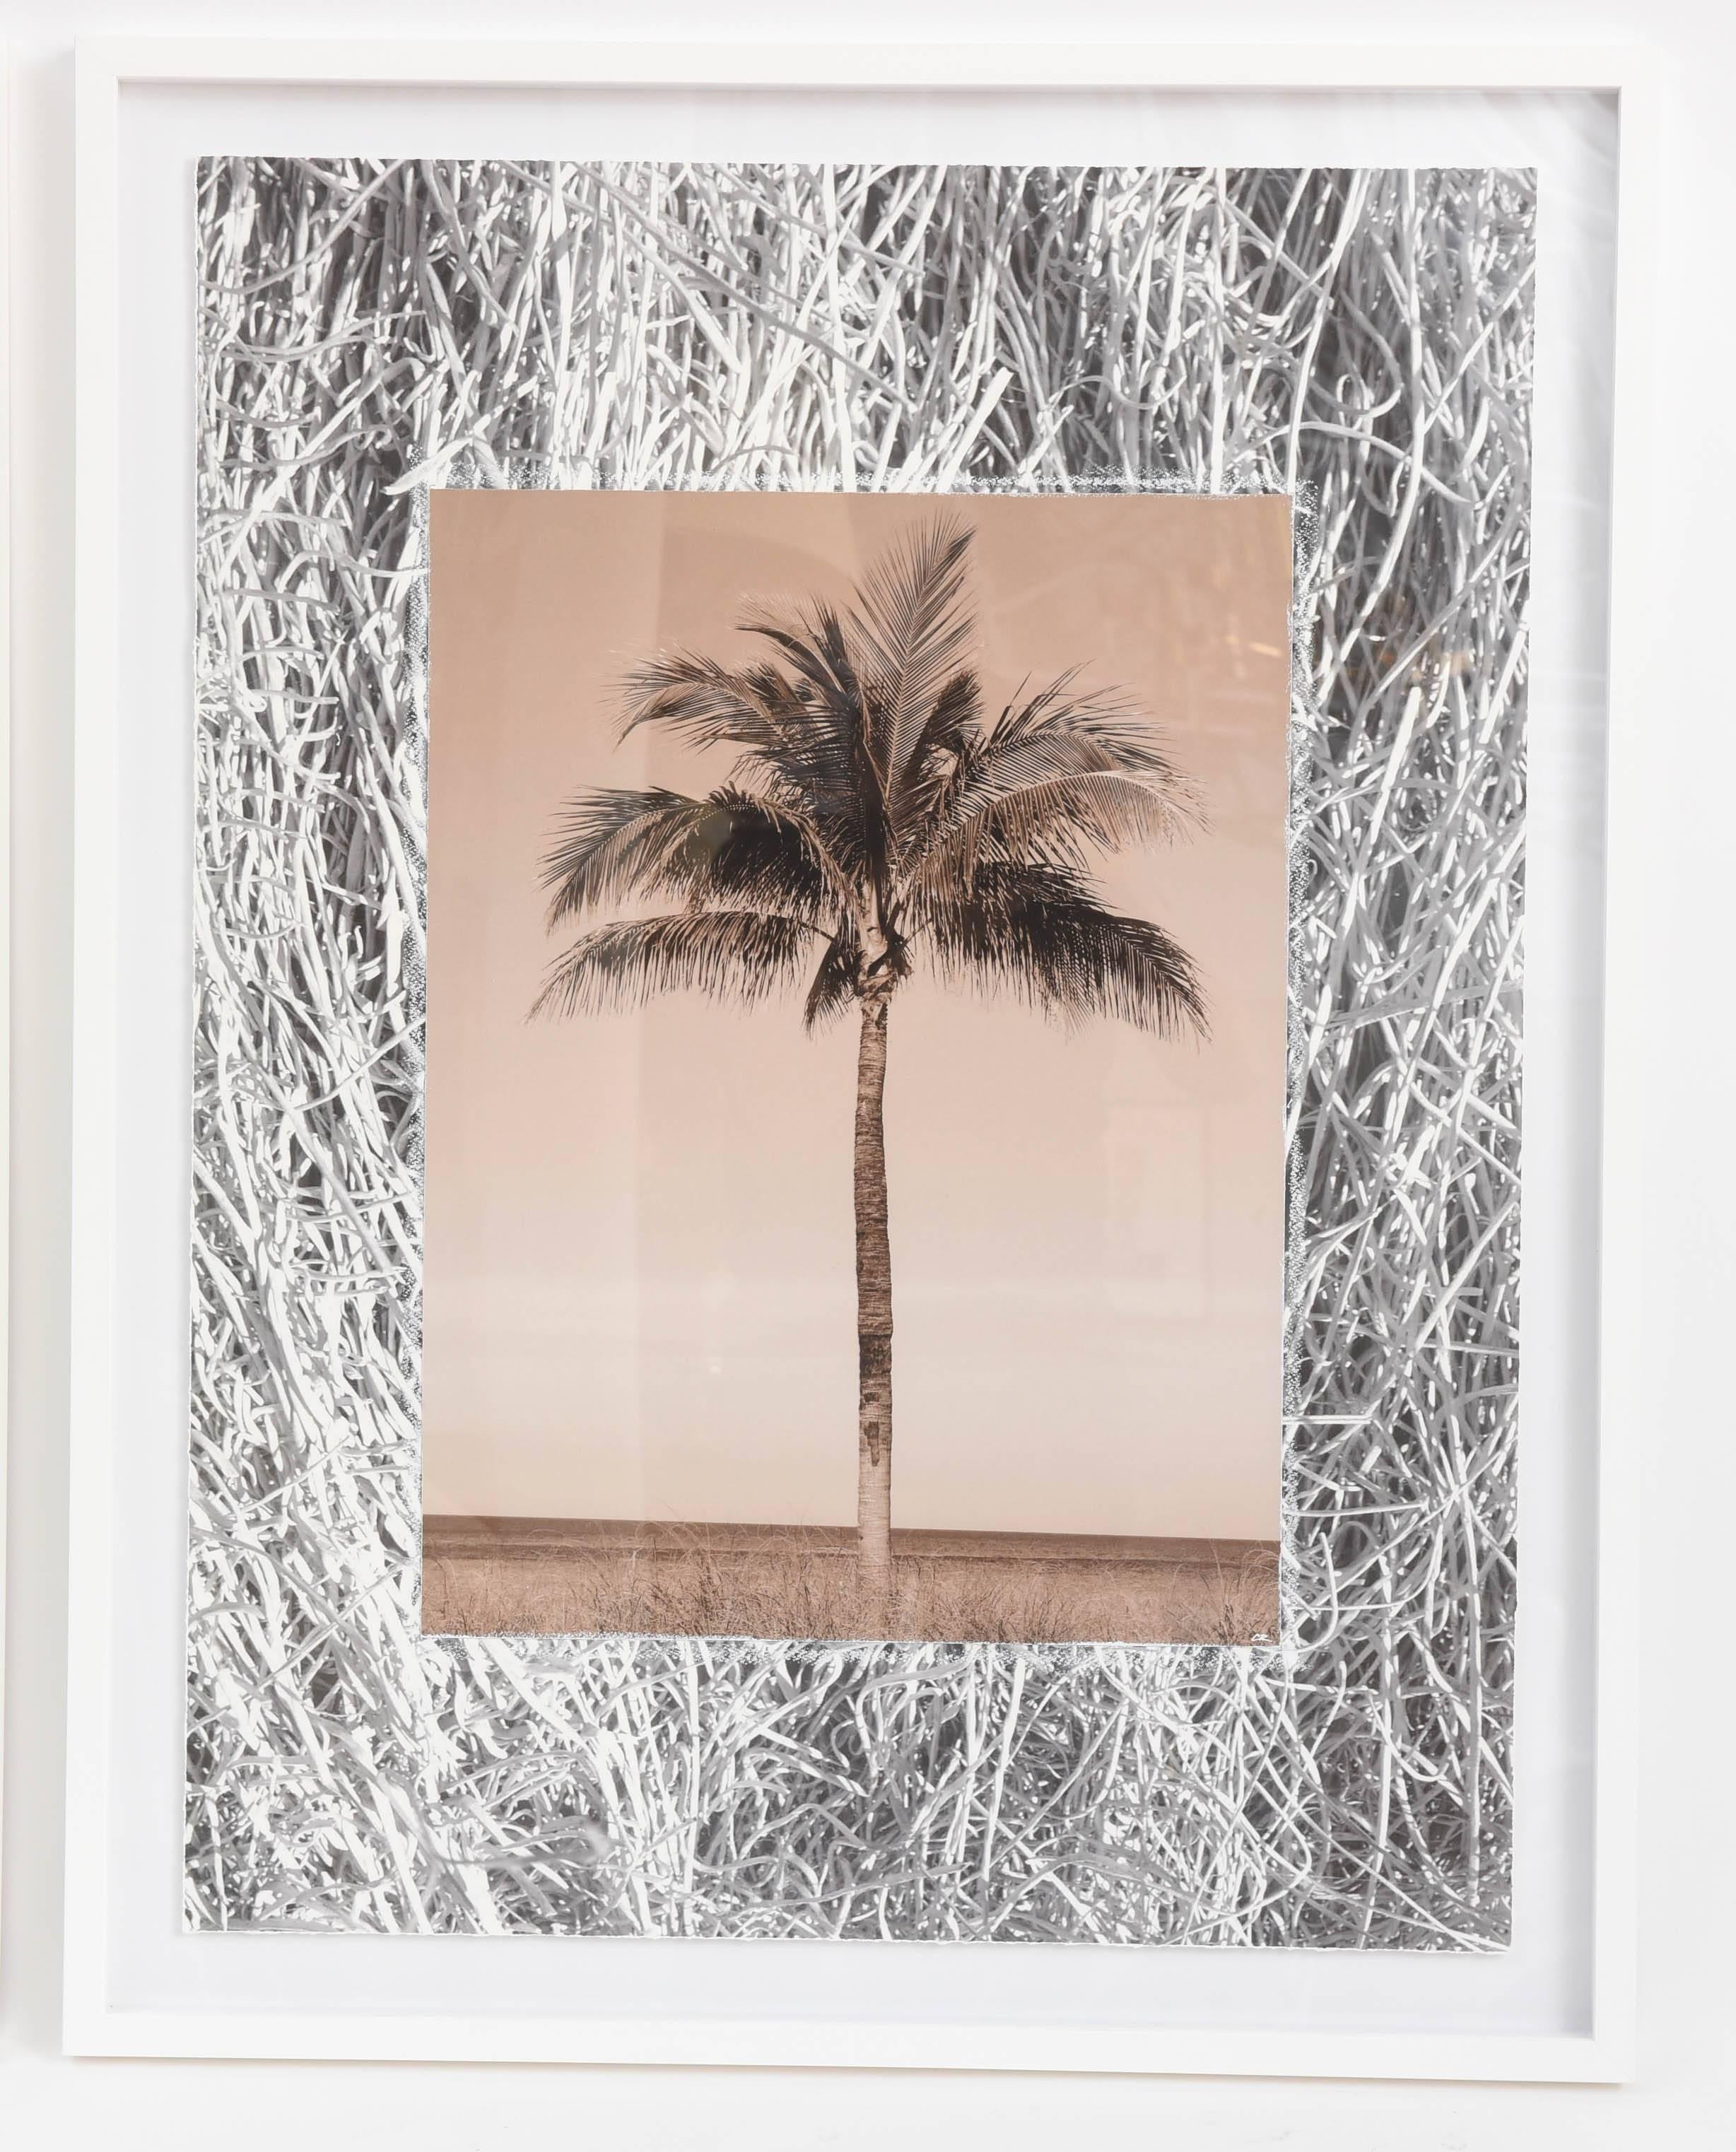 Pair of original tropical photo collages by artist Christine Ralphs, commissioned exclusively for Stripe. Sepia-toned palm photos are mounted over black and white textured backgrounds. All printed on watercolor paper and floating in simple gessoed